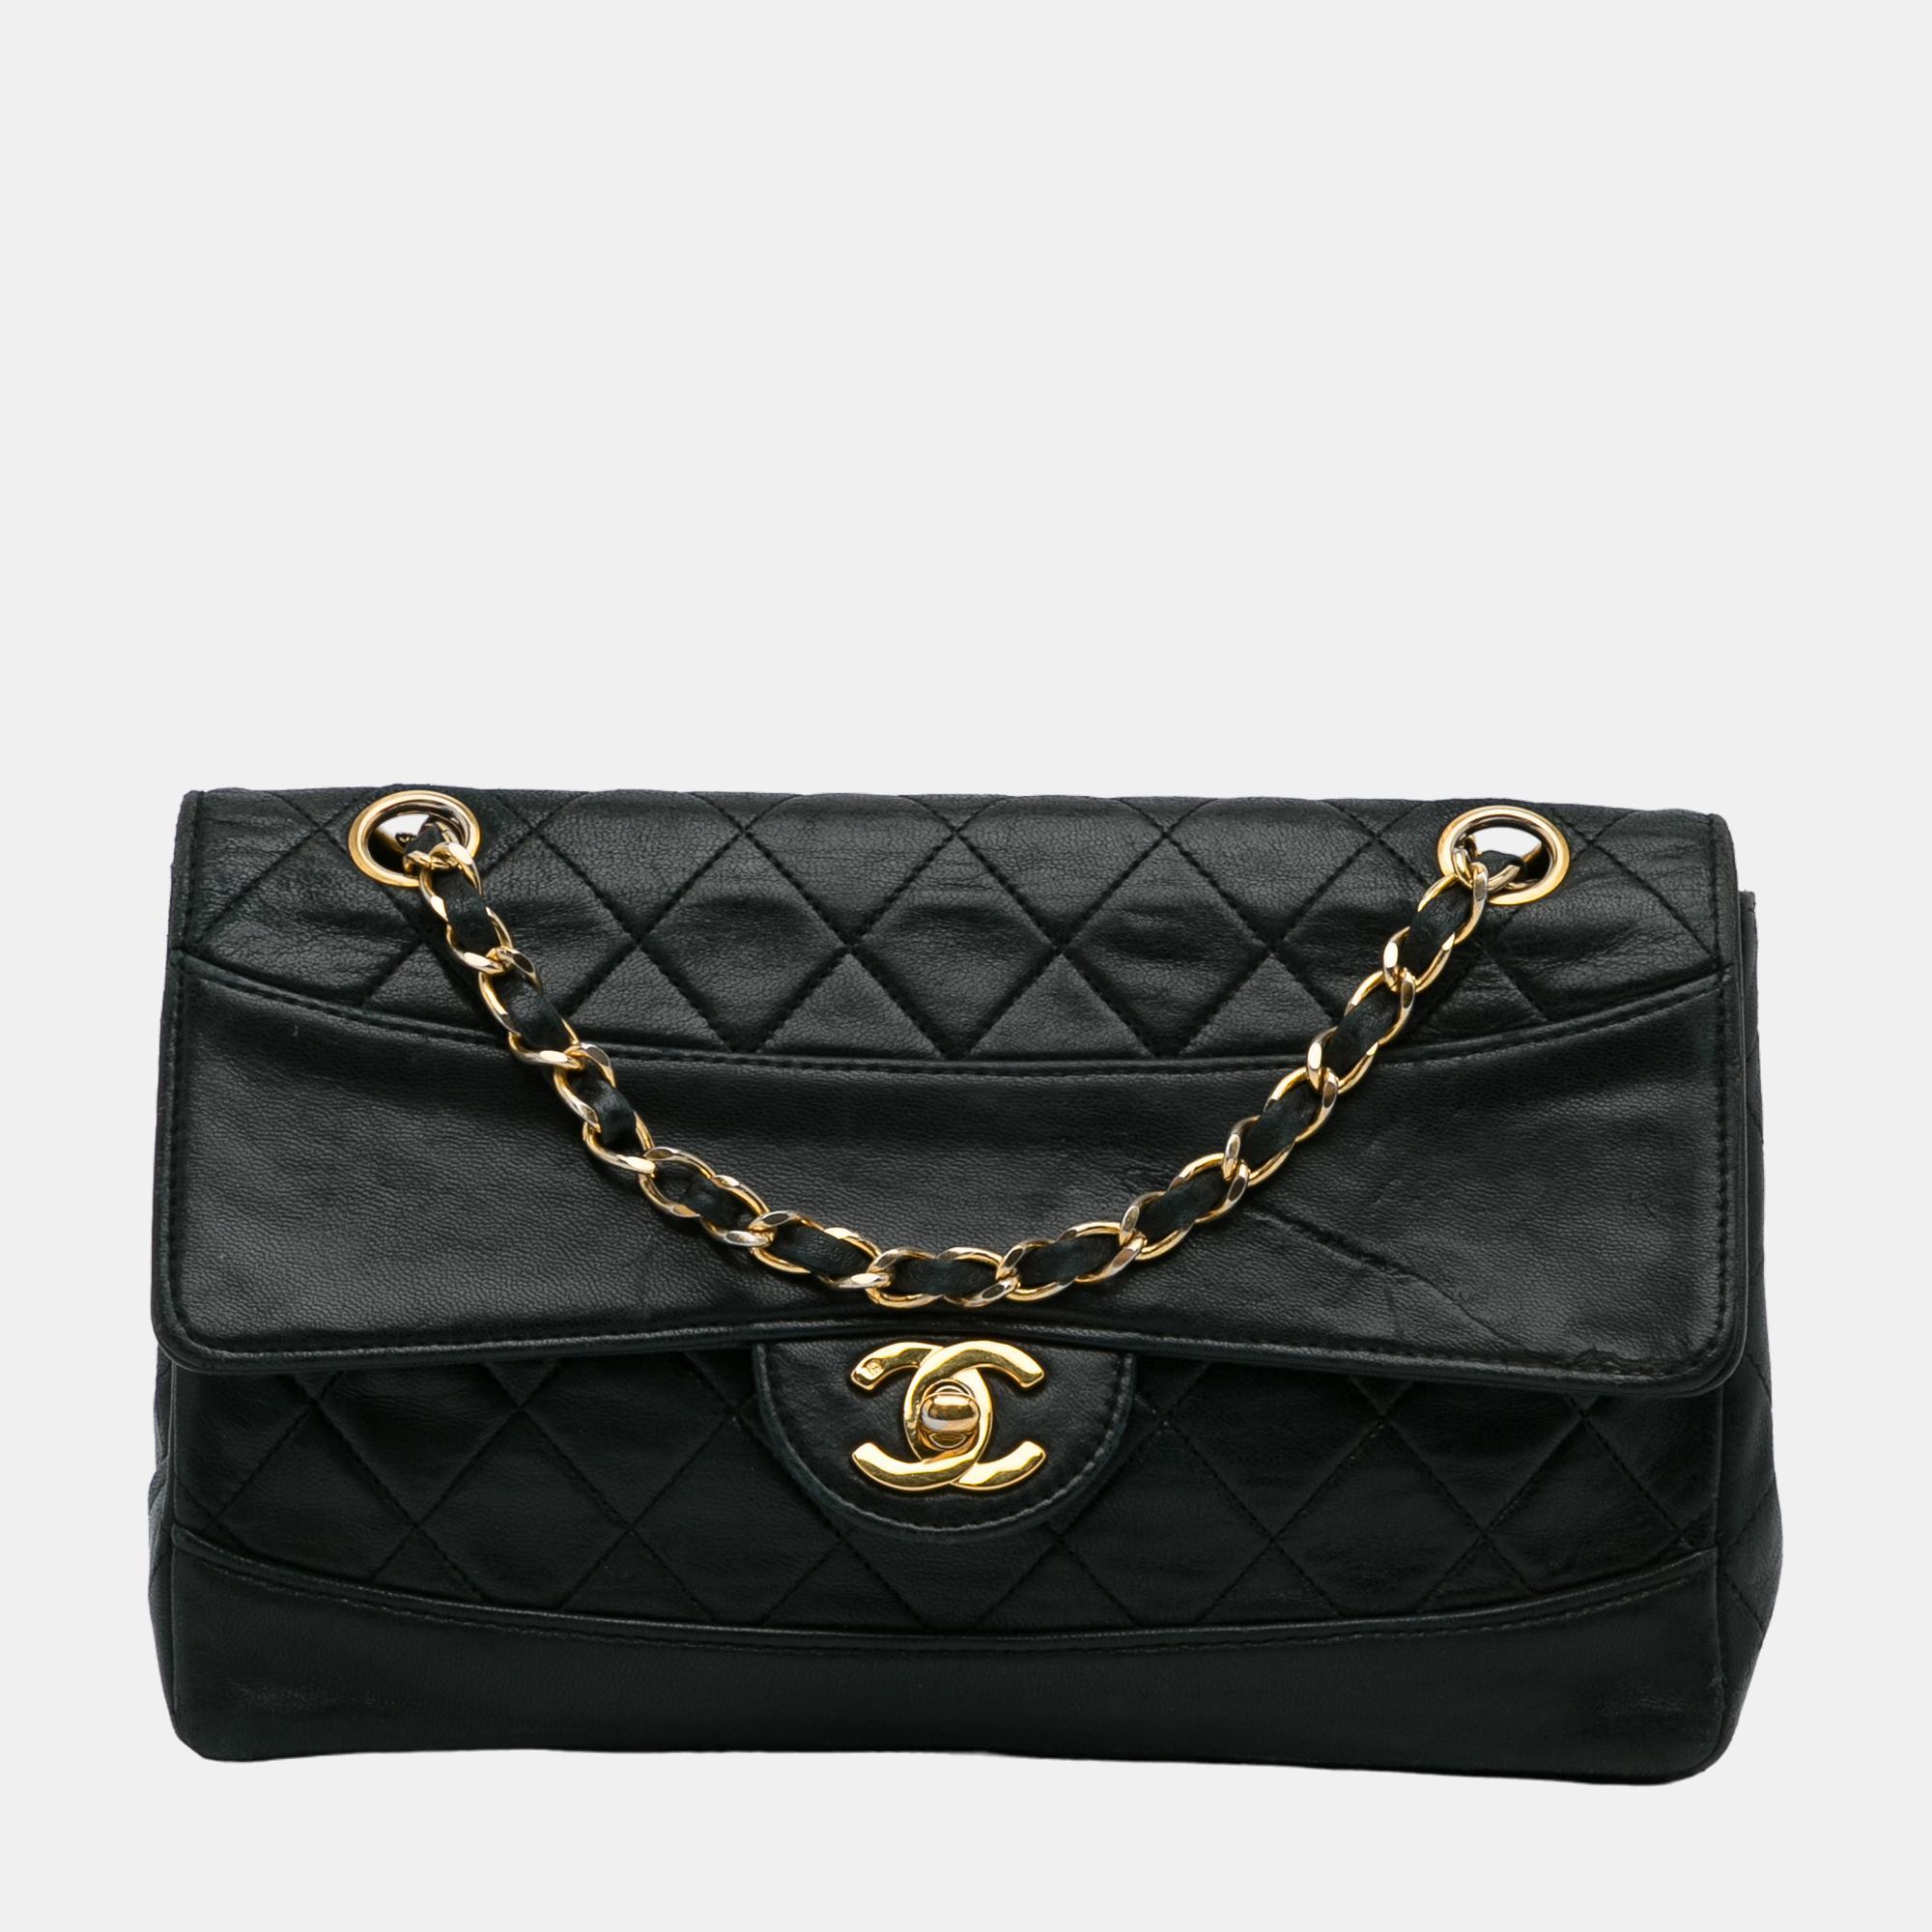 This shoulder bag features a quilted lambskin leather body a woven leather chain strap a front flap with twist lock closure and an interior slip pocket.